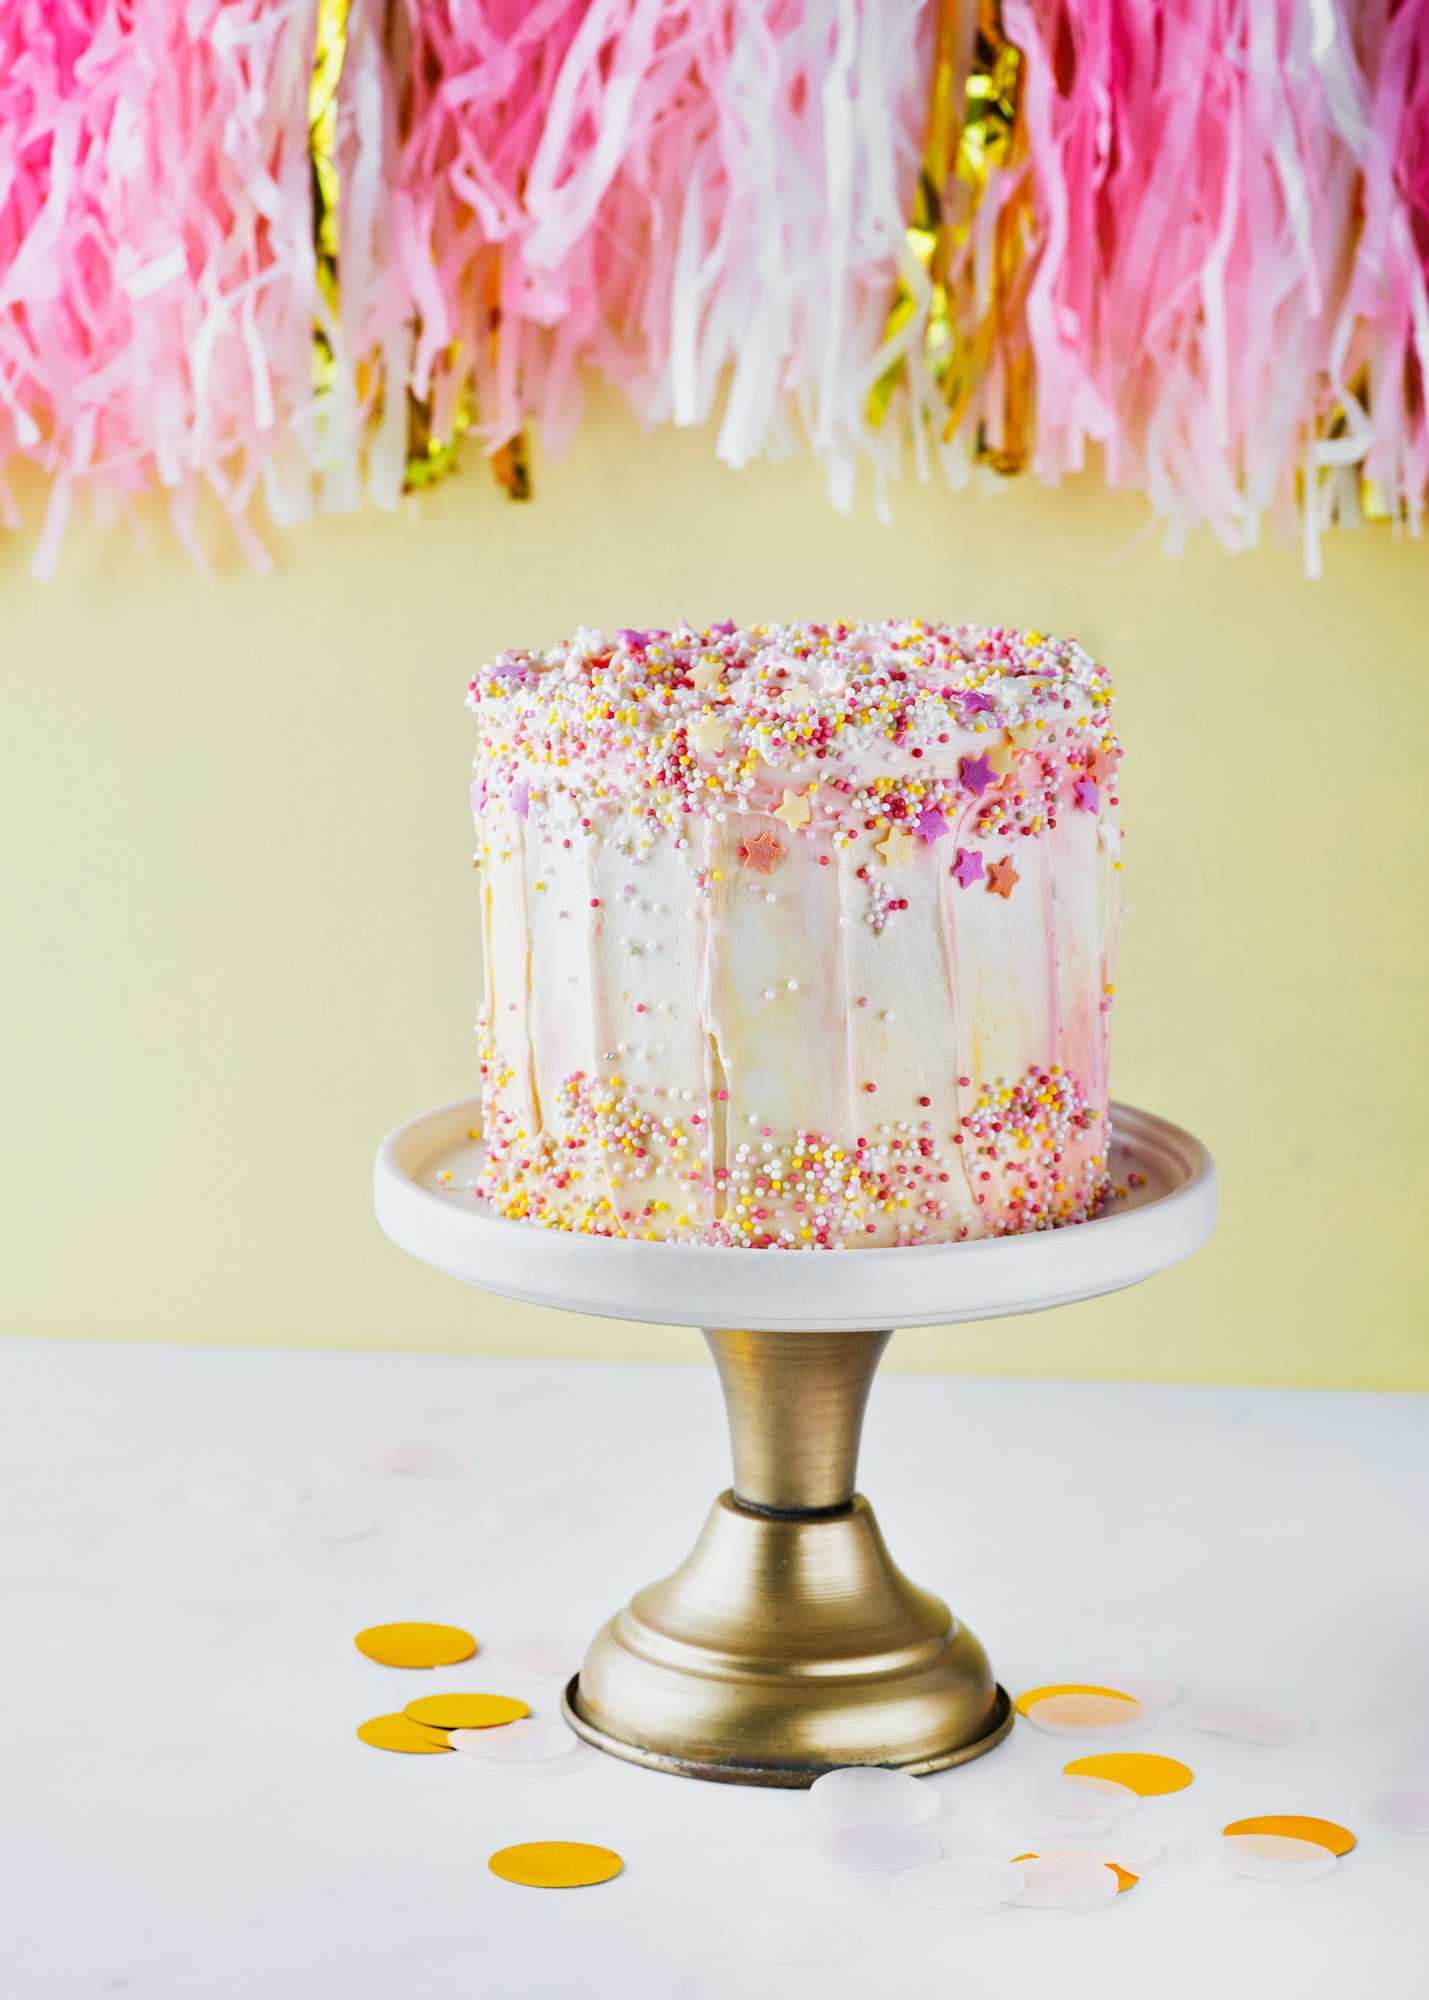 colorful-birthday-cake-with-sprinkles-on-a-yellow-background-.jpg